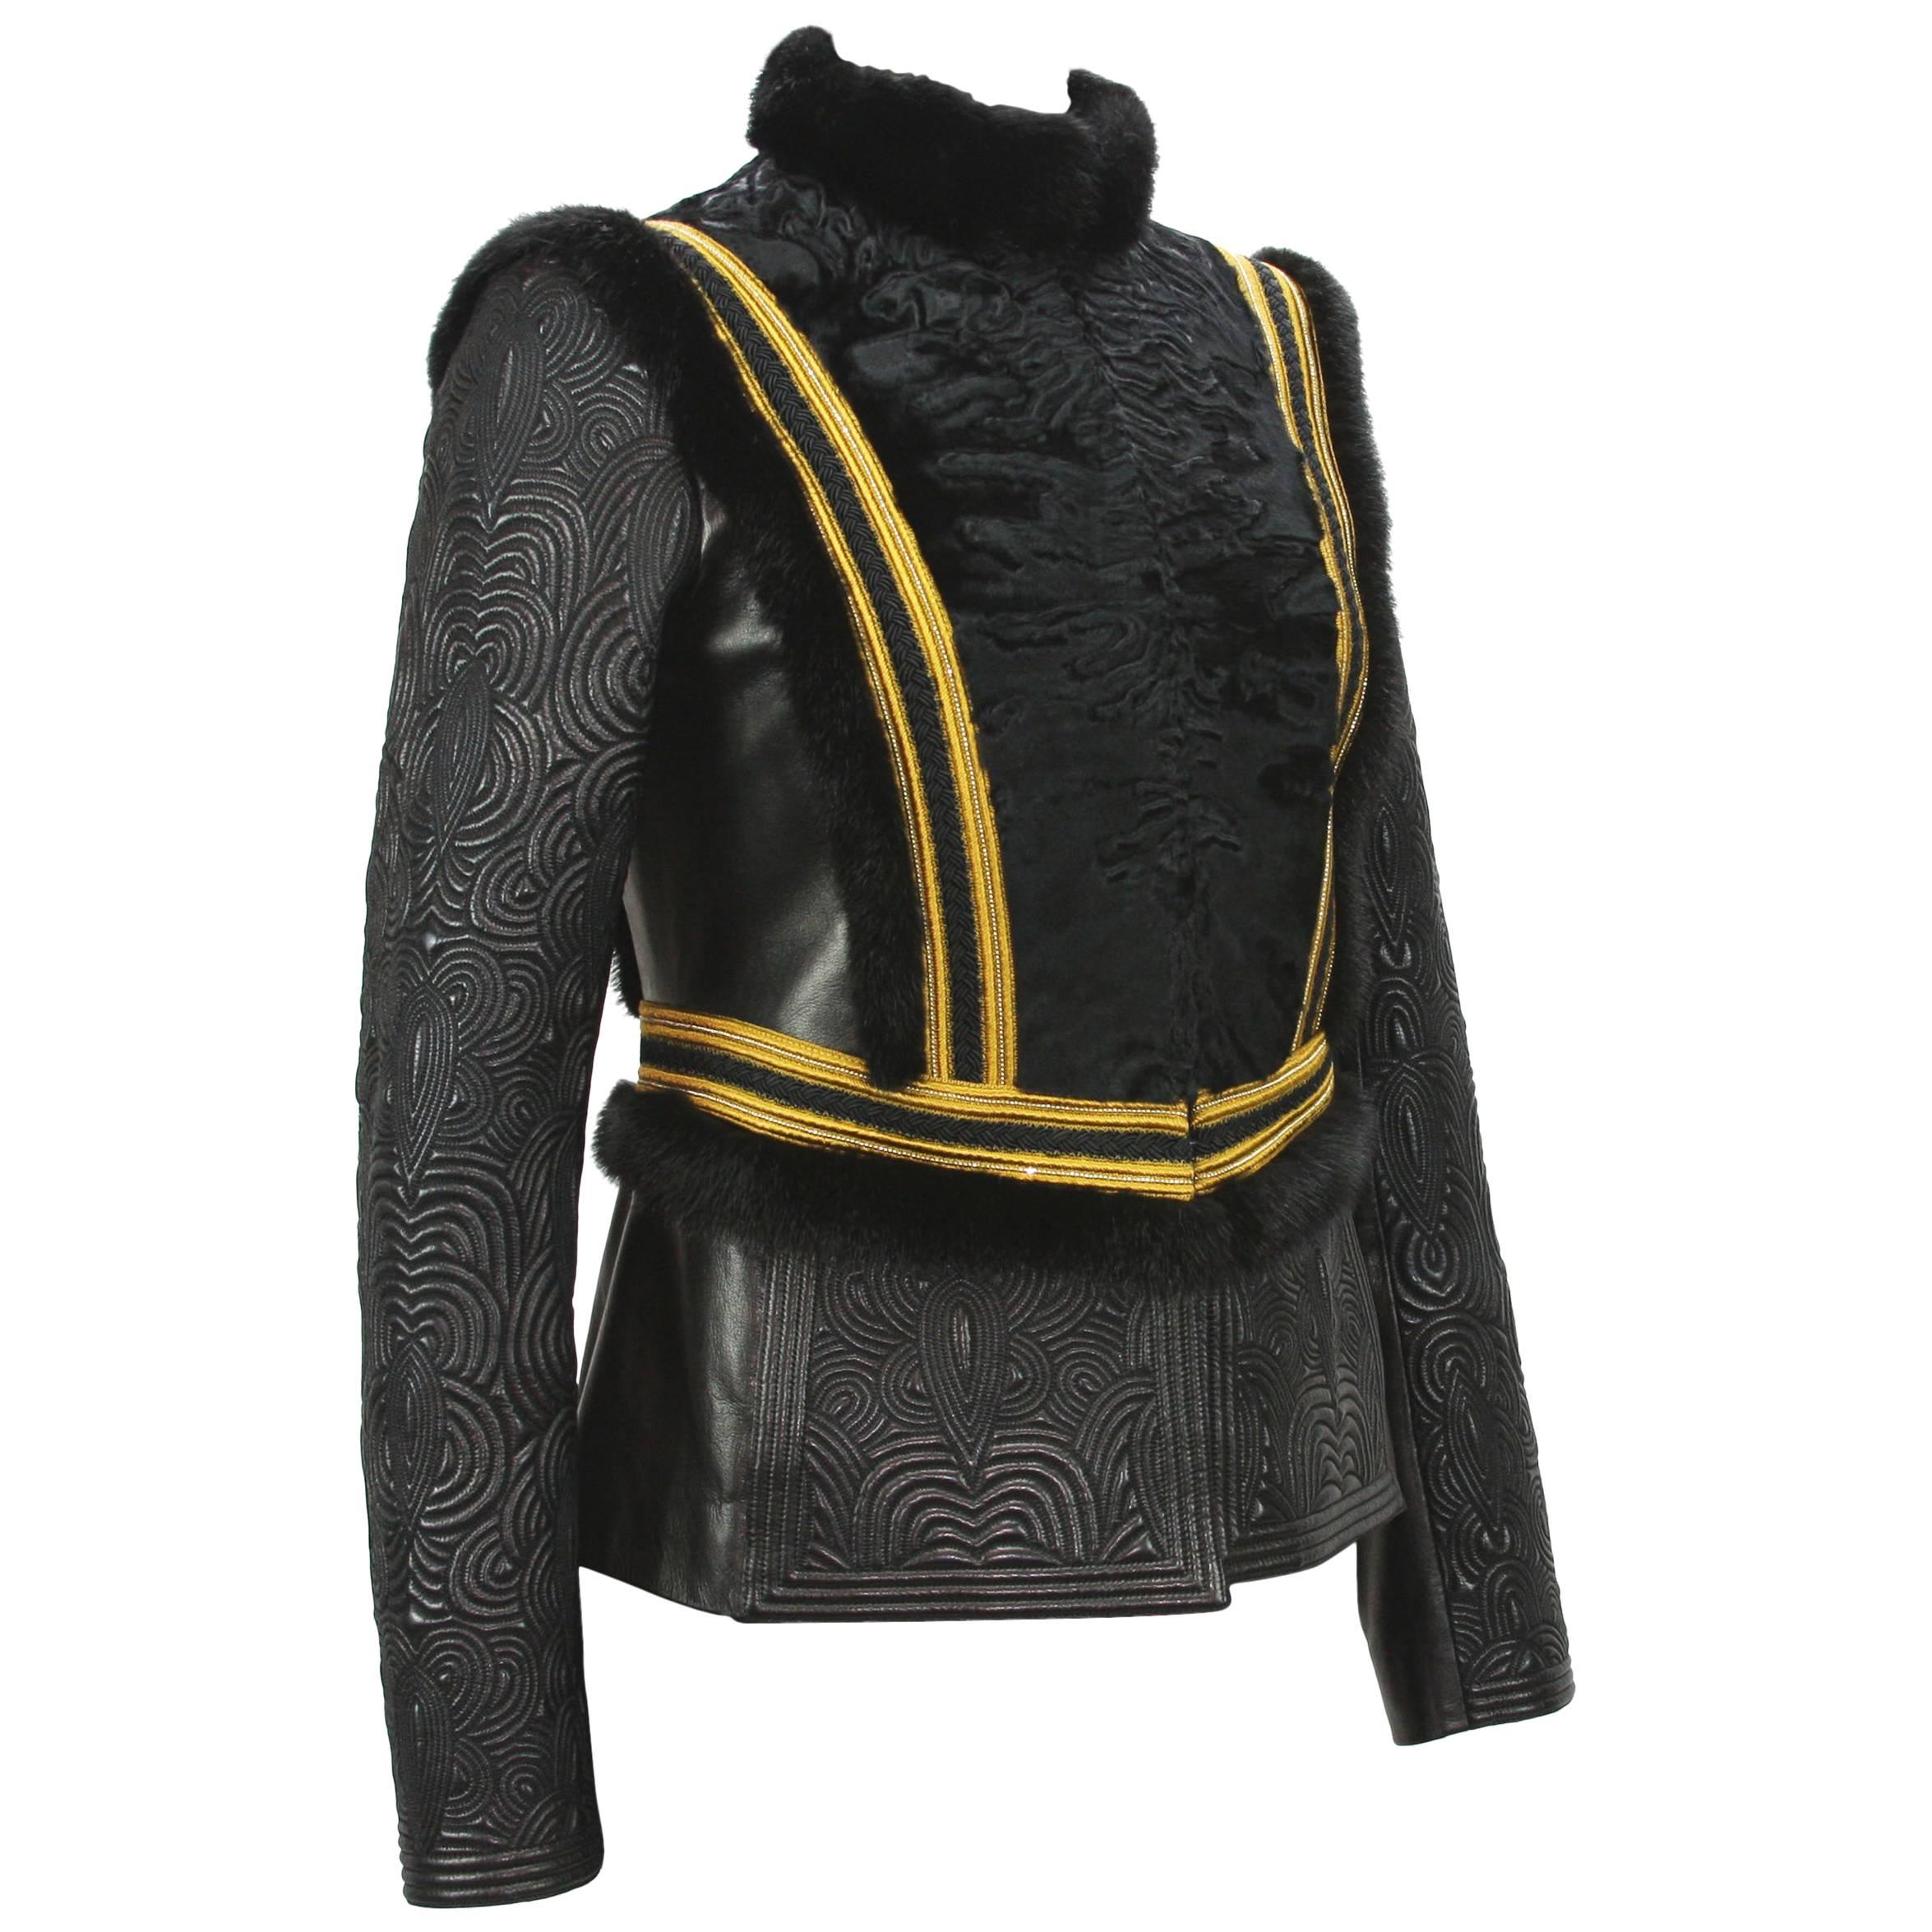 NEW Exquisite $7650 ETRO Embossed Leather Mink Fur Lamb Jacket It.42 - US 6 For Sale